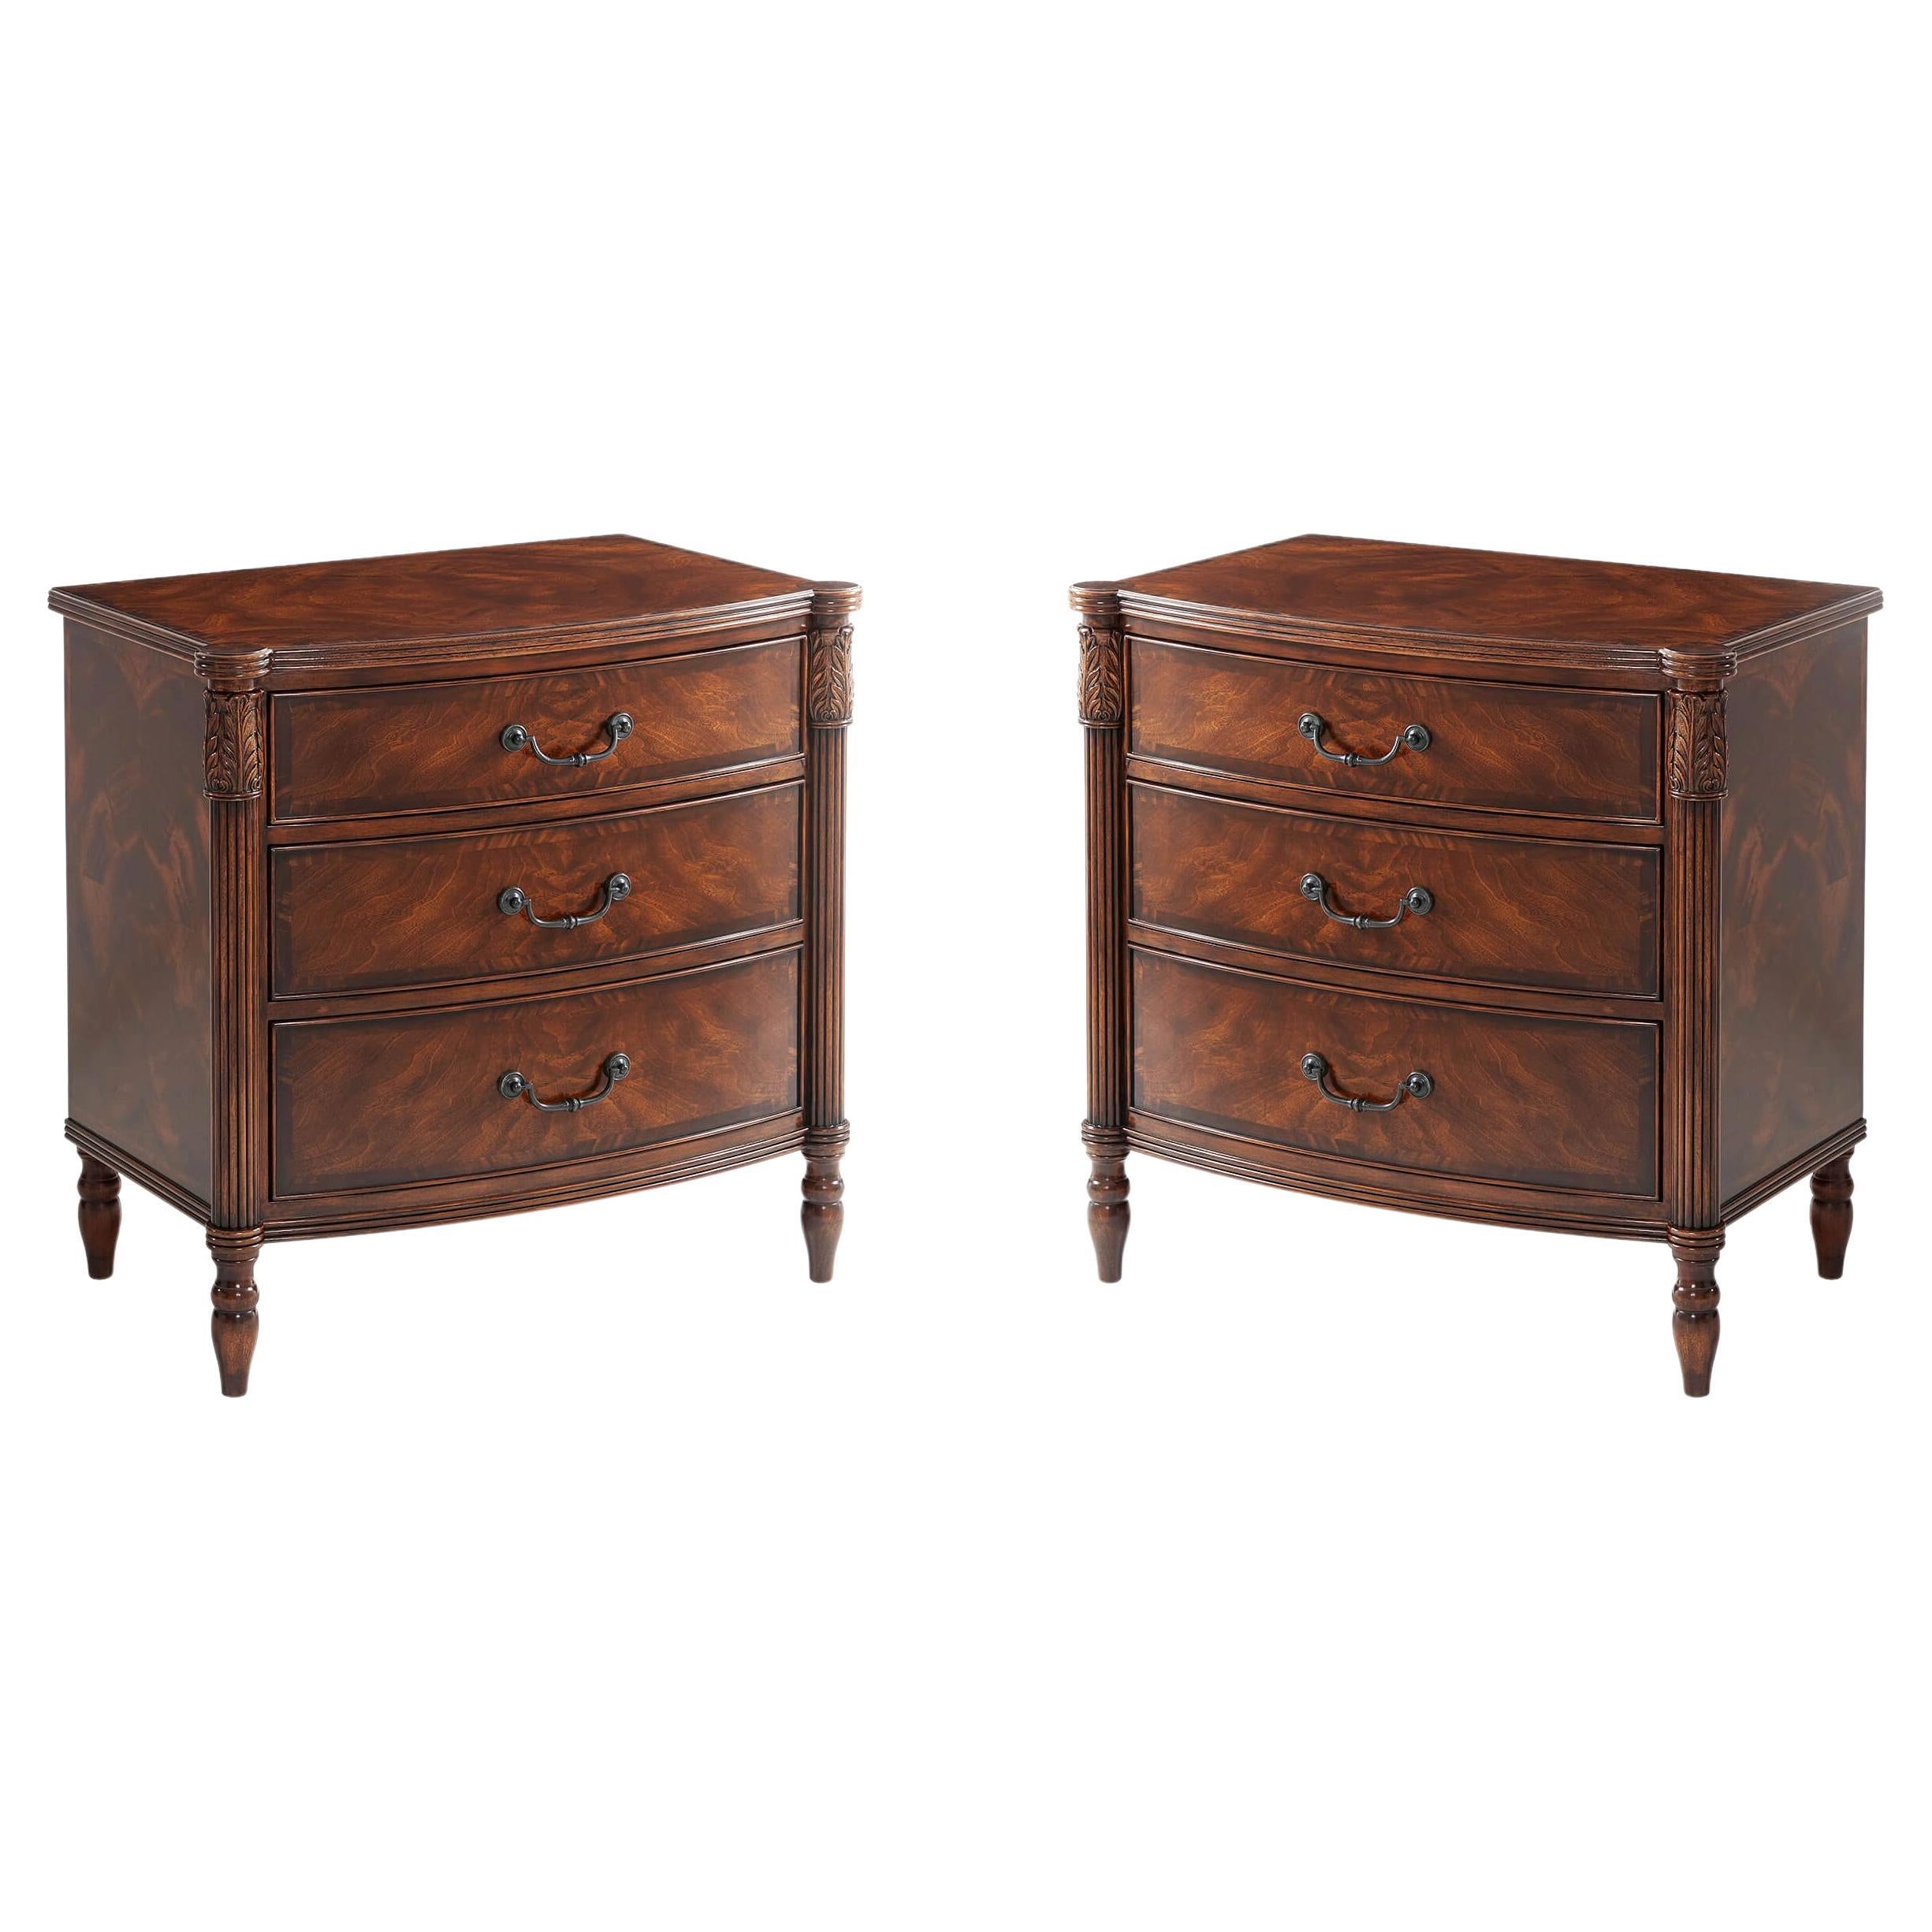 Pair of Federal Style Mahogany Bedside Chests